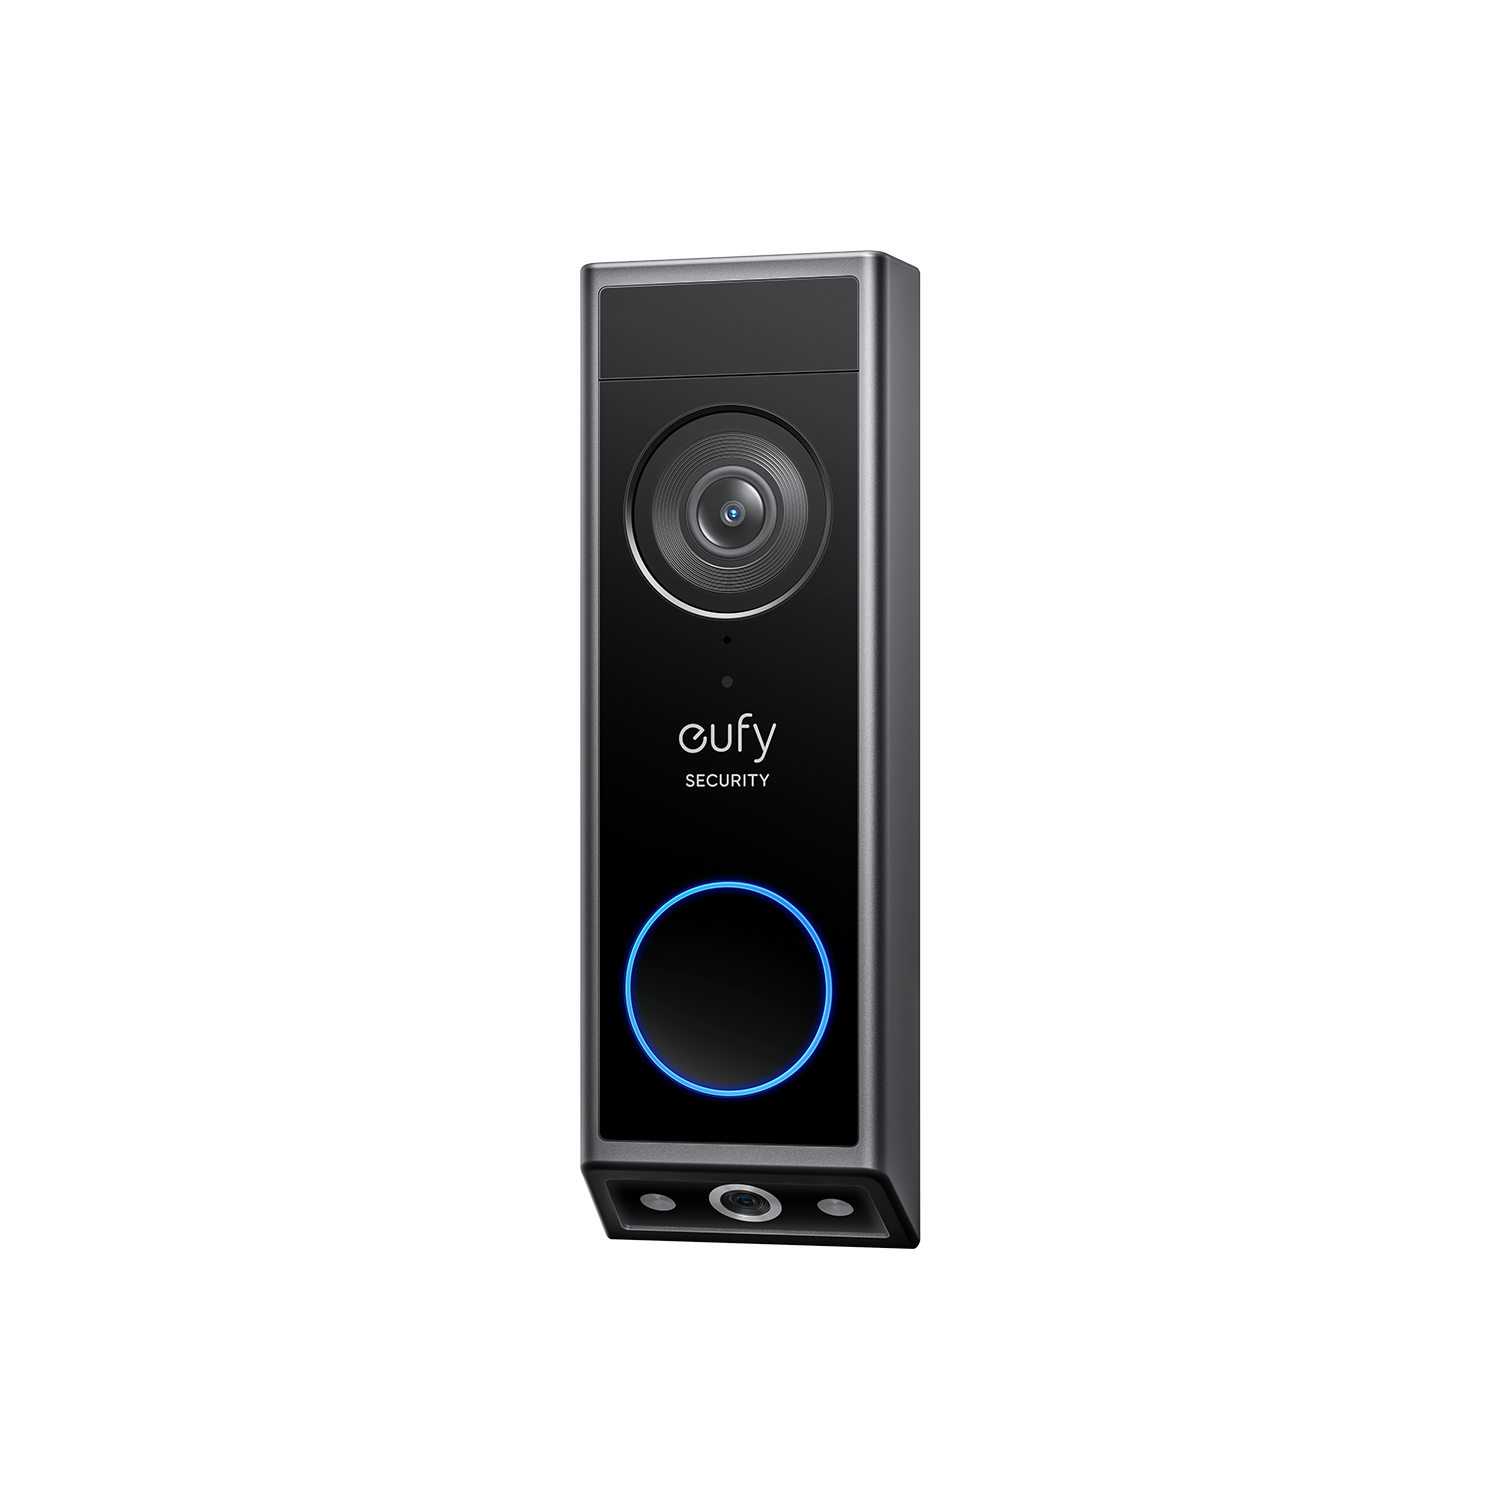 Video Doorbell E340 -Doorbell Camera Without Subscription